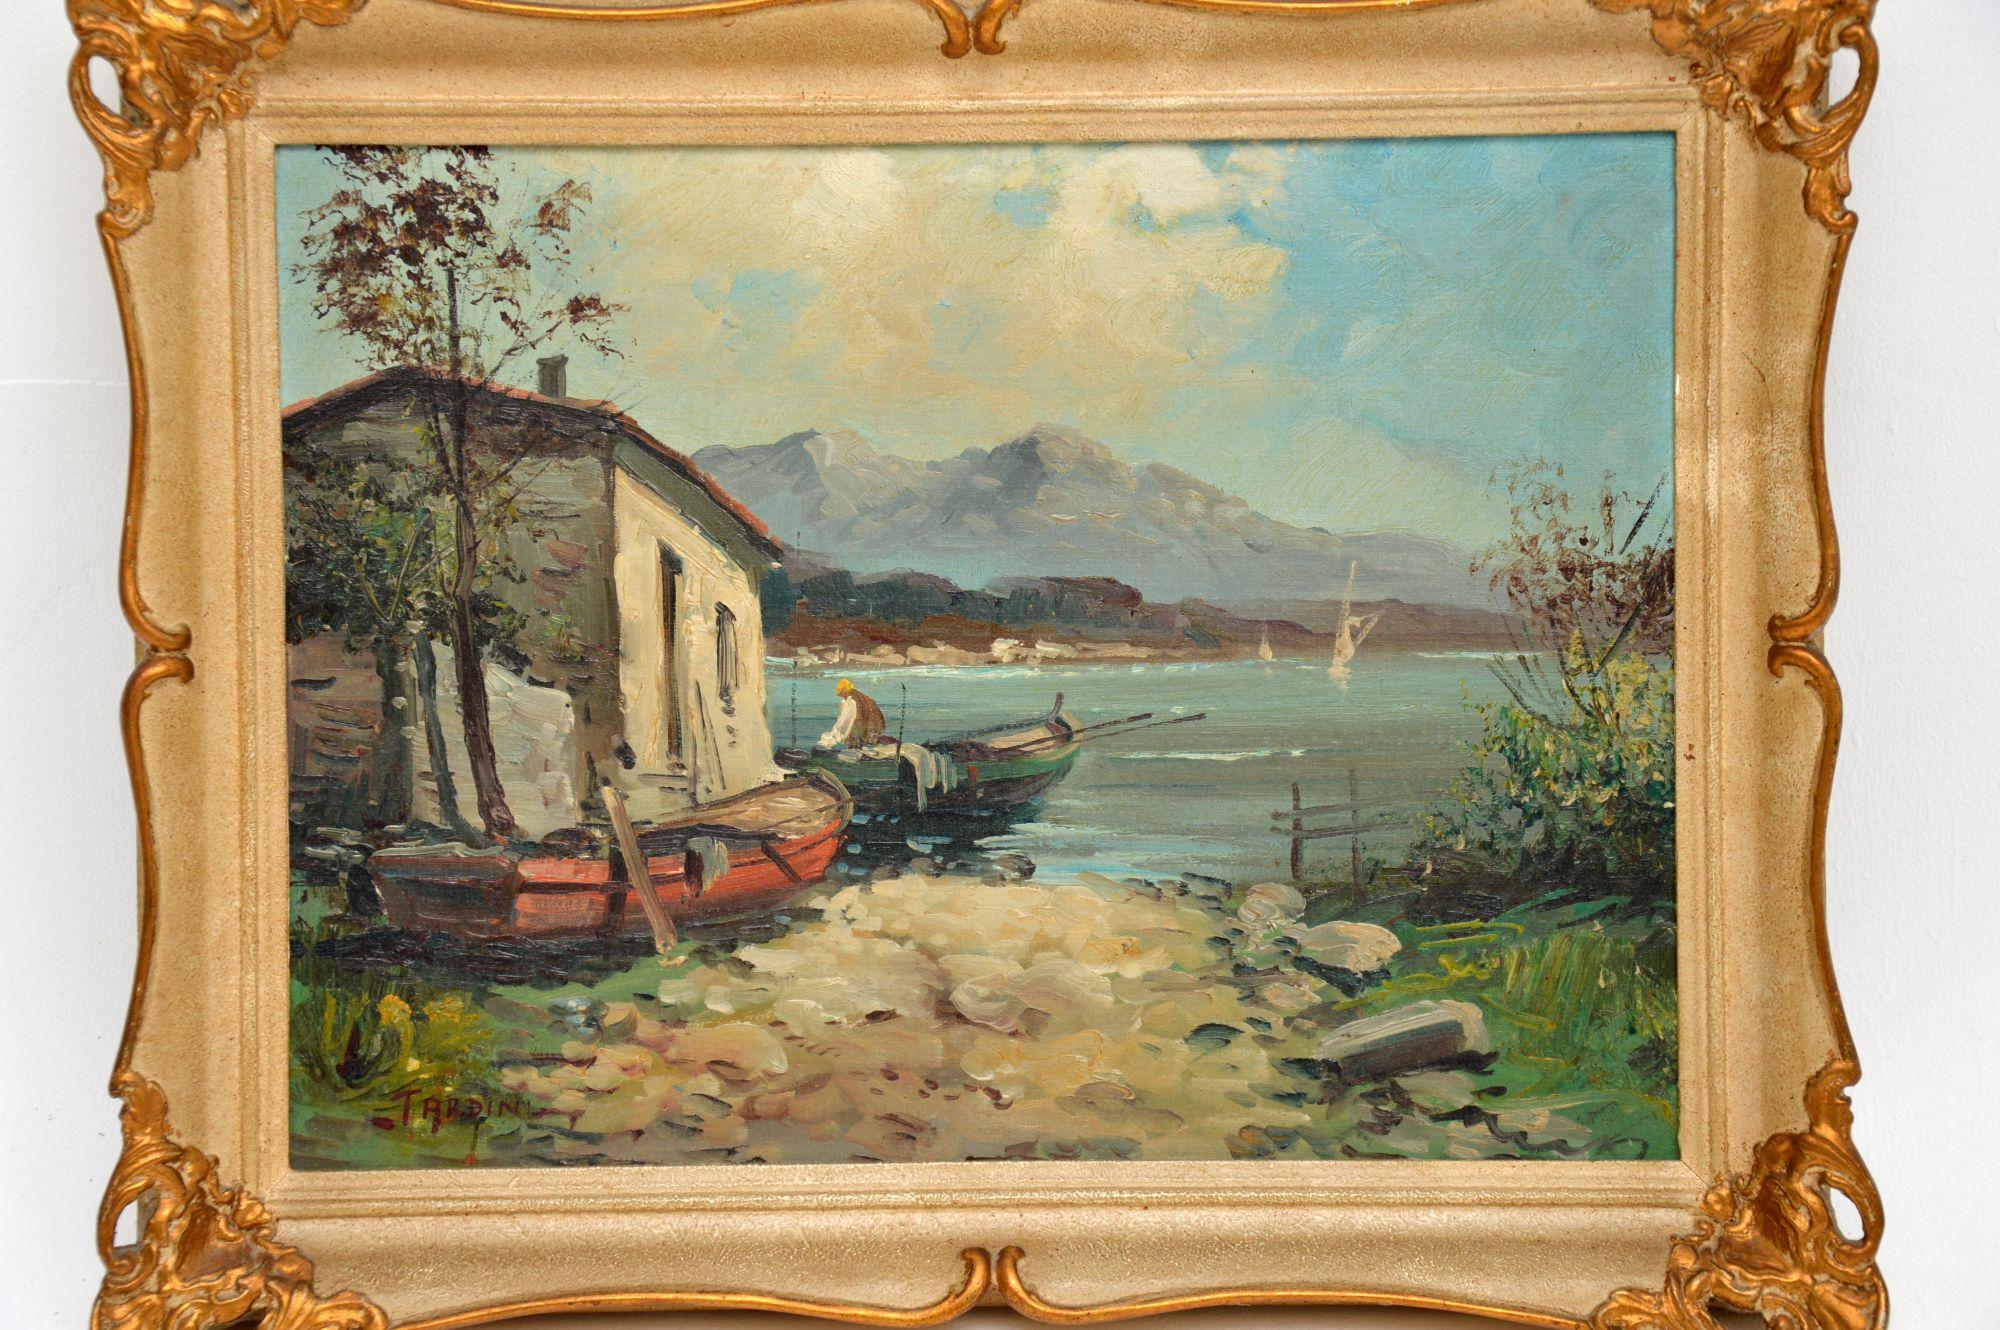 Late 19th Century Antique Italian Landscape Oil Painting by 'Tardini' For Sale